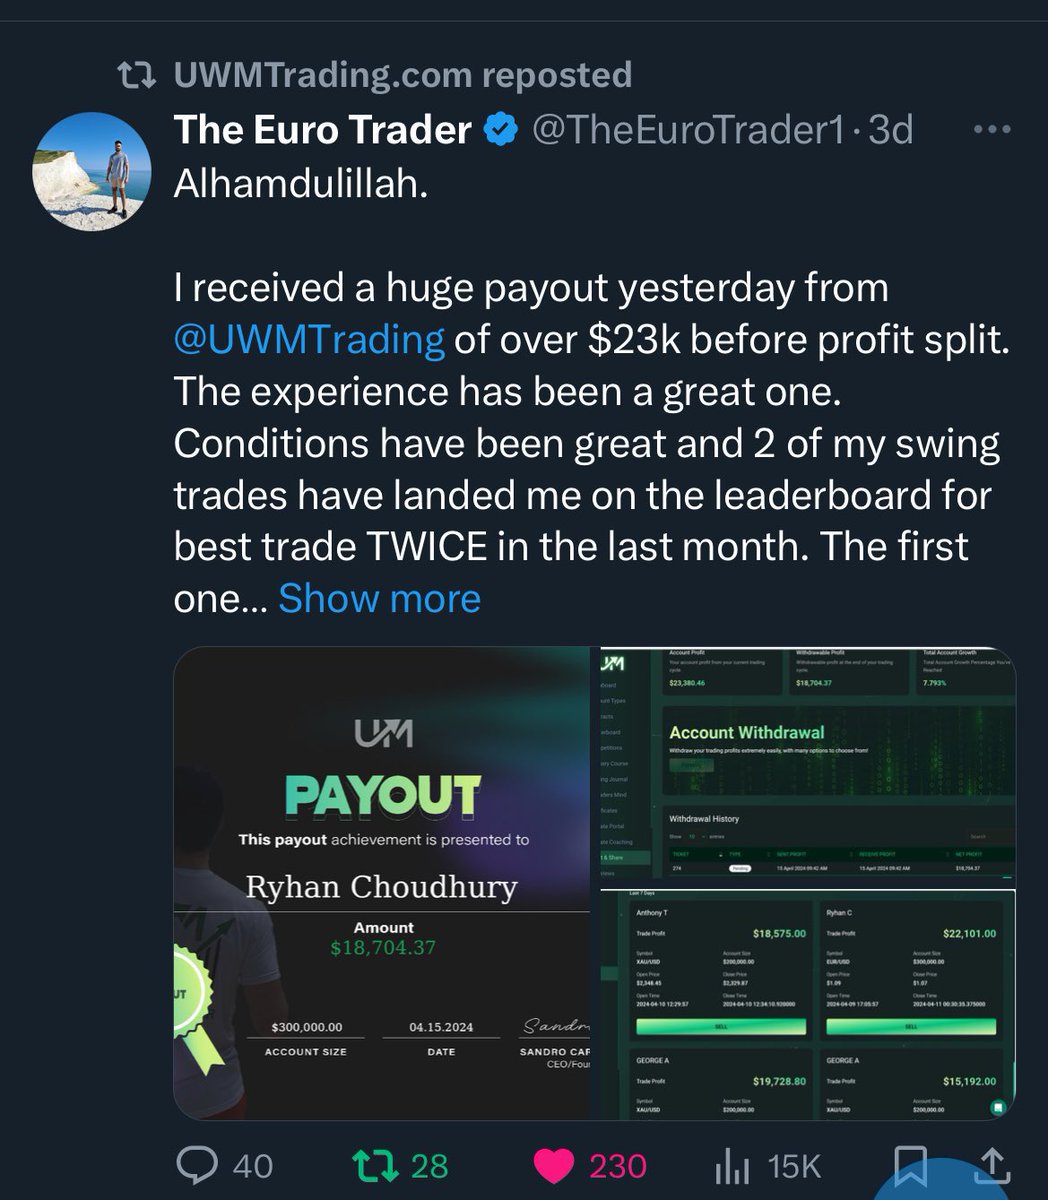 Massive repost ✅📢

Payouts are the most important criteria to look into when considering prop firms you want to trade with  

That’s why you should choose @UWMTrading 

~Active c-trader 
~Active match-trade
~Active Dx-trade 
~incoming MT4/MT5

#getfundedwithuwm today !!